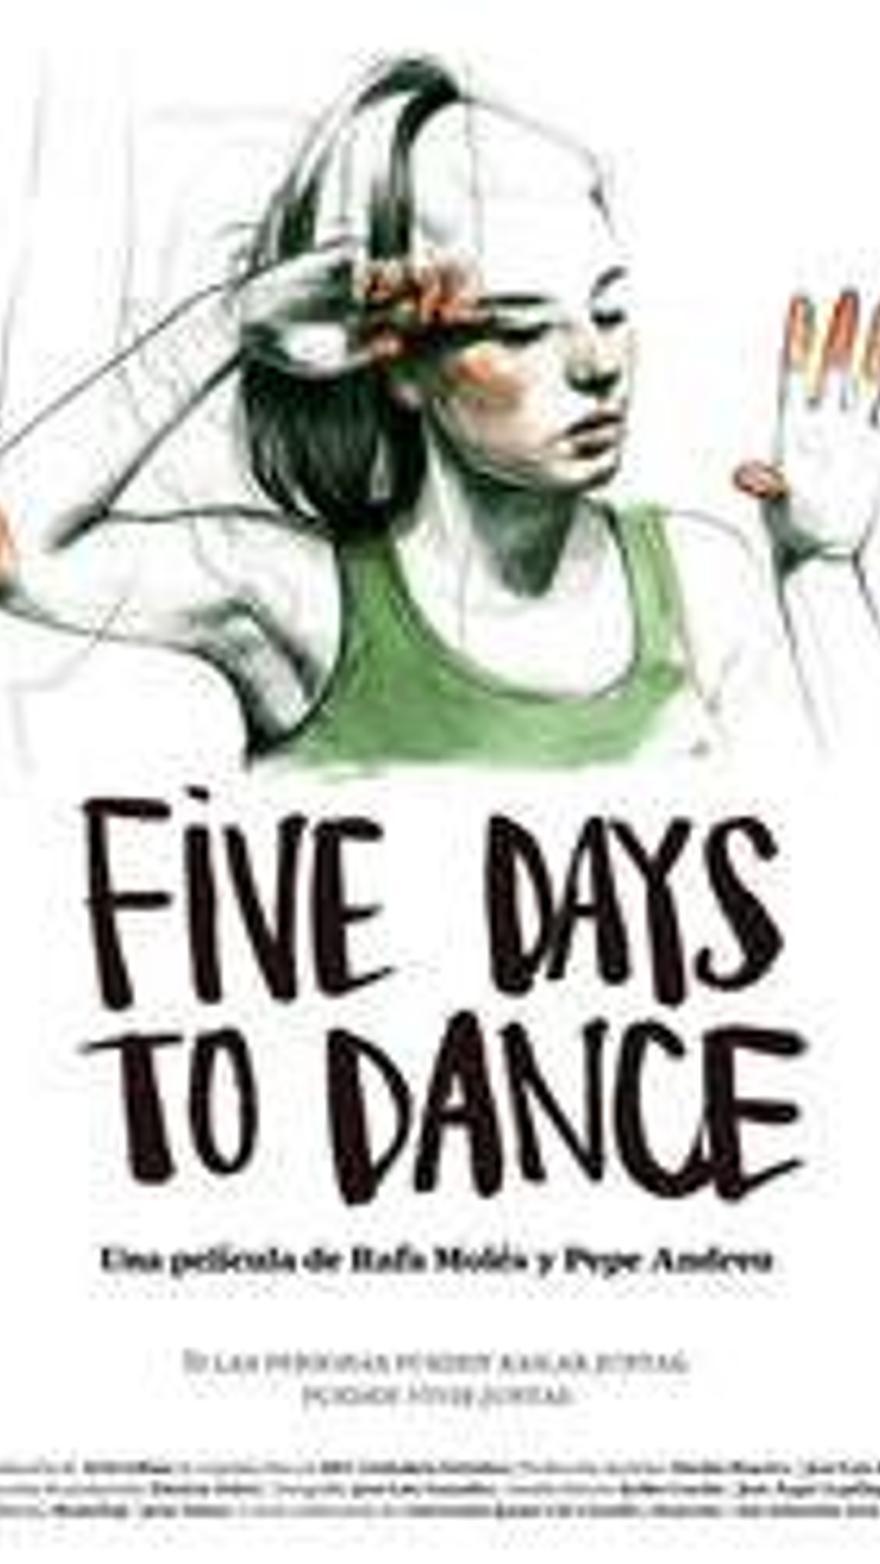 Five days to dance